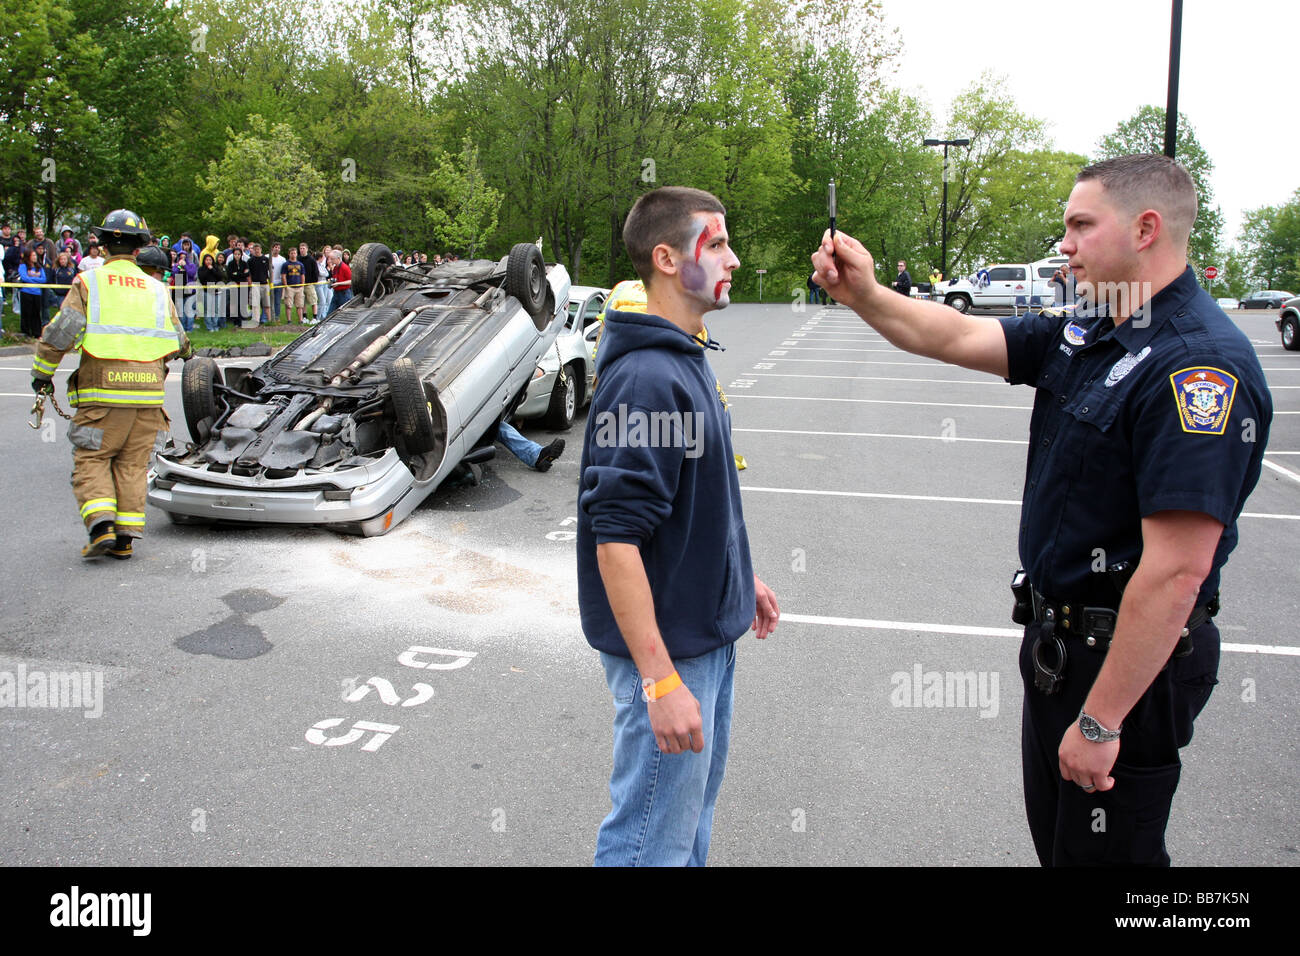 A police officer gives a teenager a DUI test during a mock Drunk driving accident at a USA High School Stock Photo